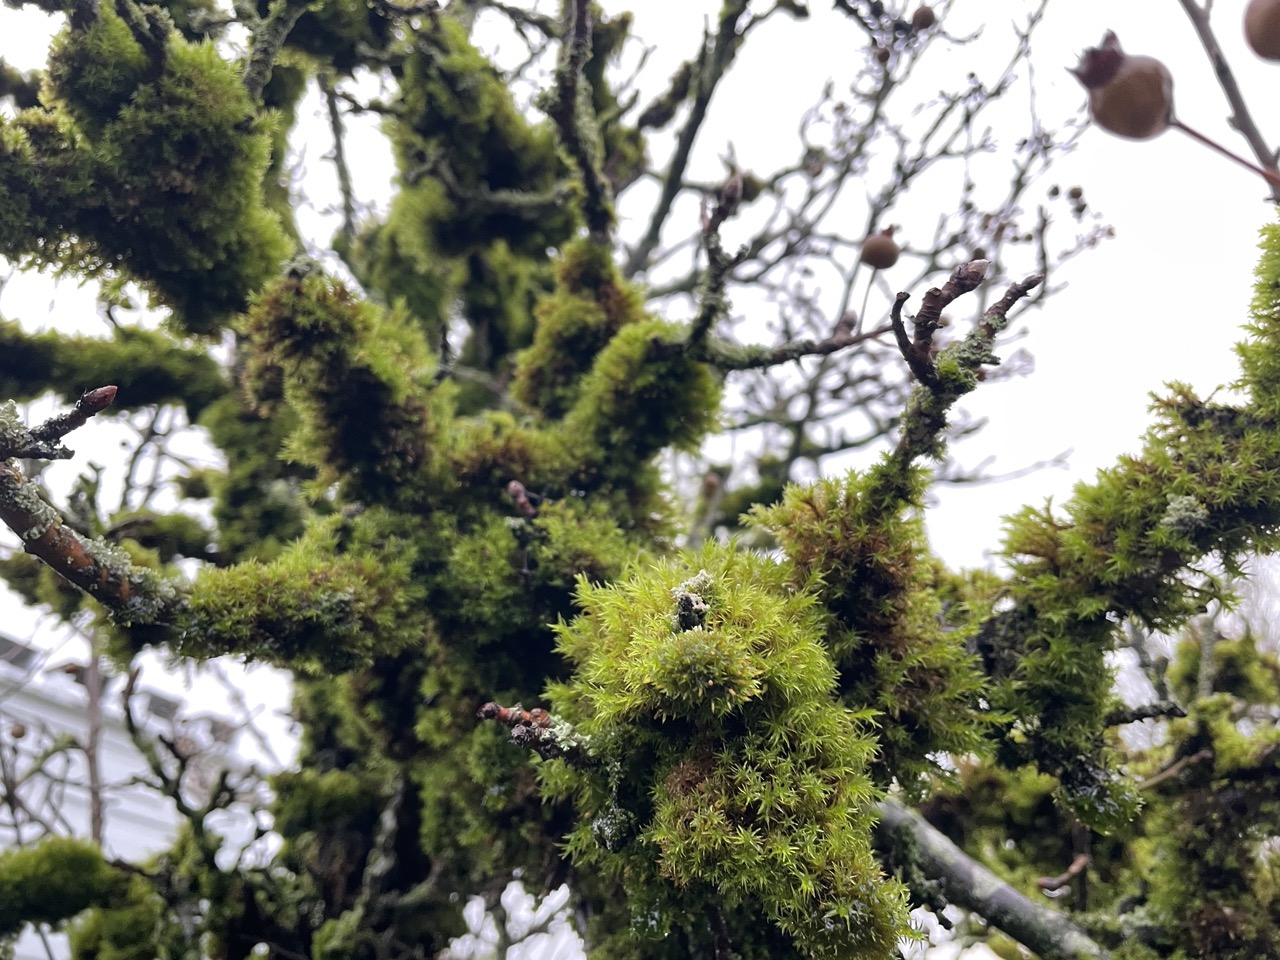 It's so wet here that the trees have become moss.